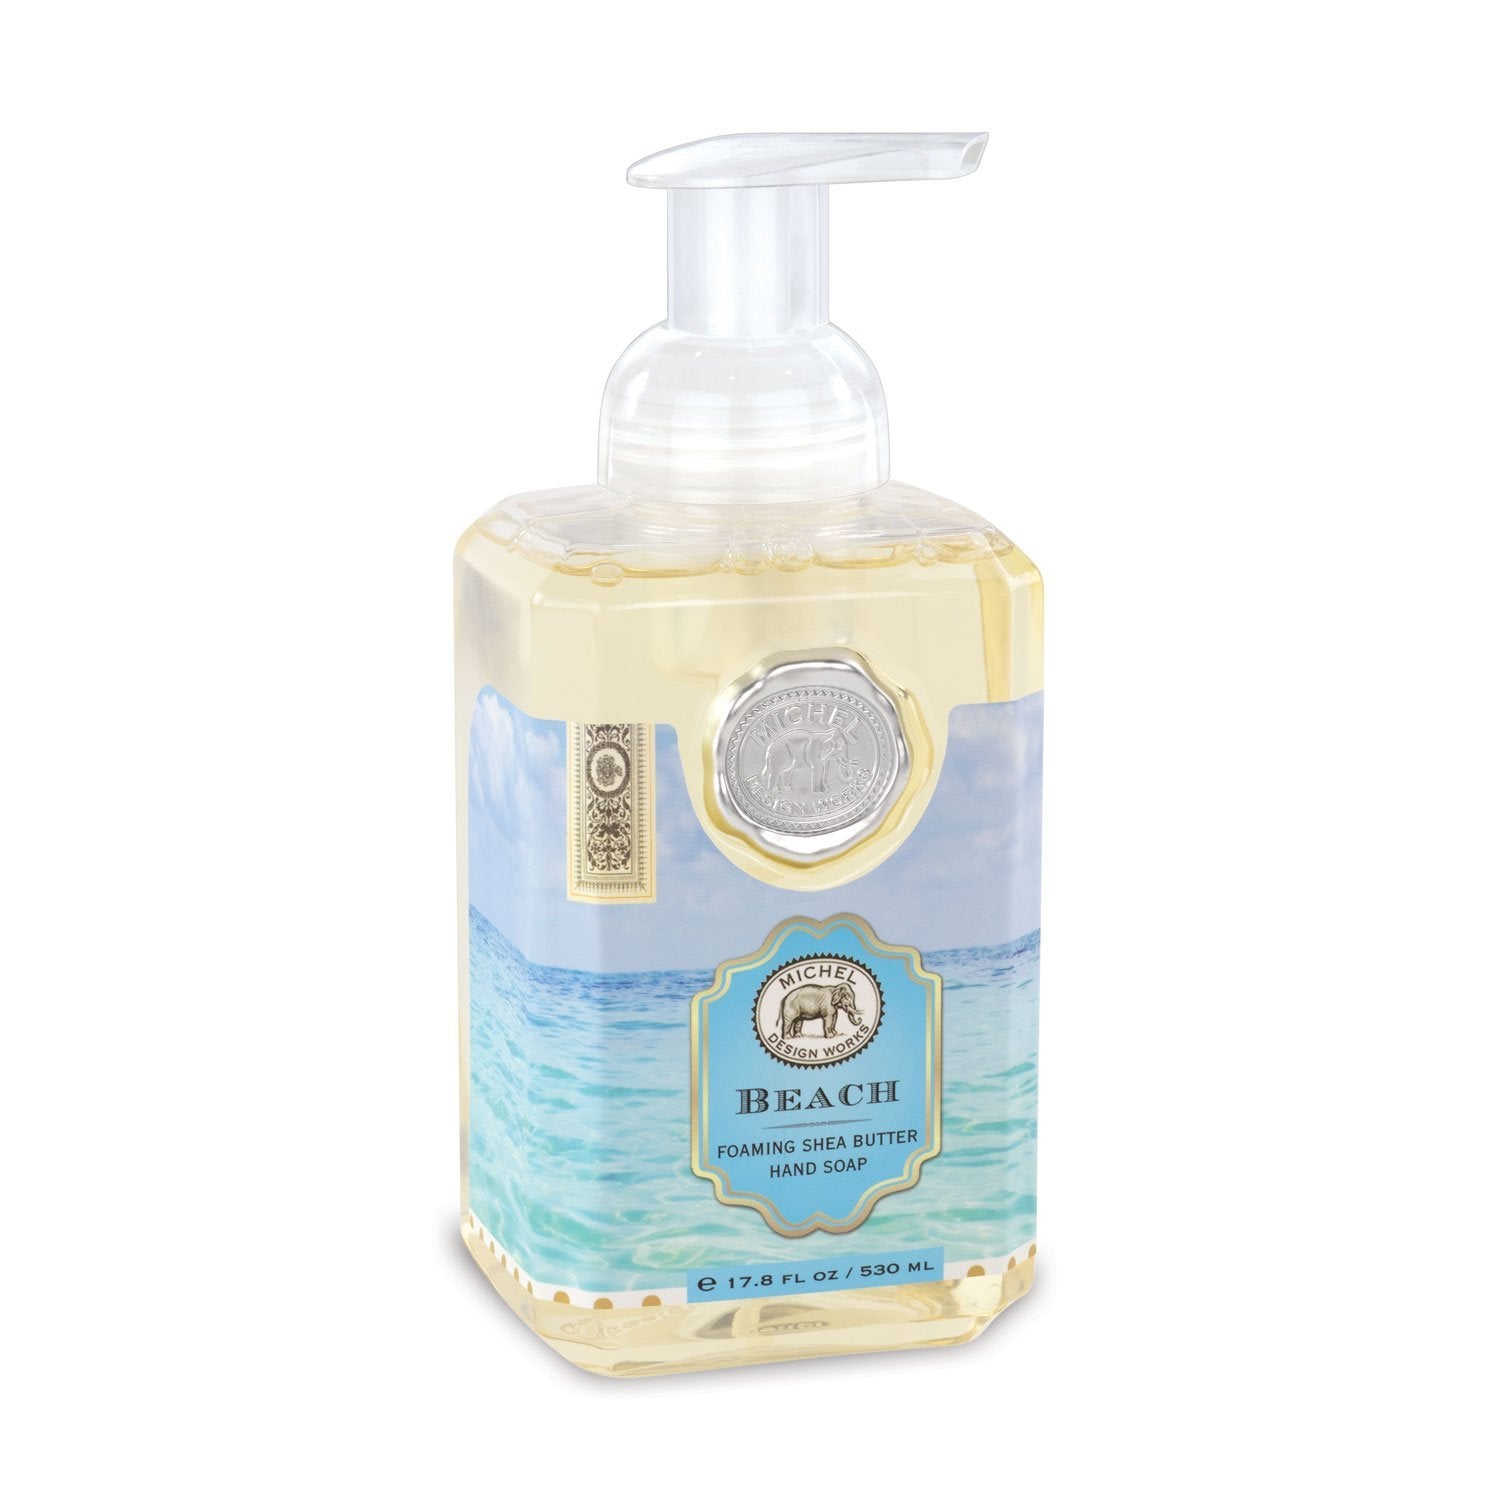 BEACH FOAMING HAND SOAP - Molly's! A Chic and Unique Boutique 